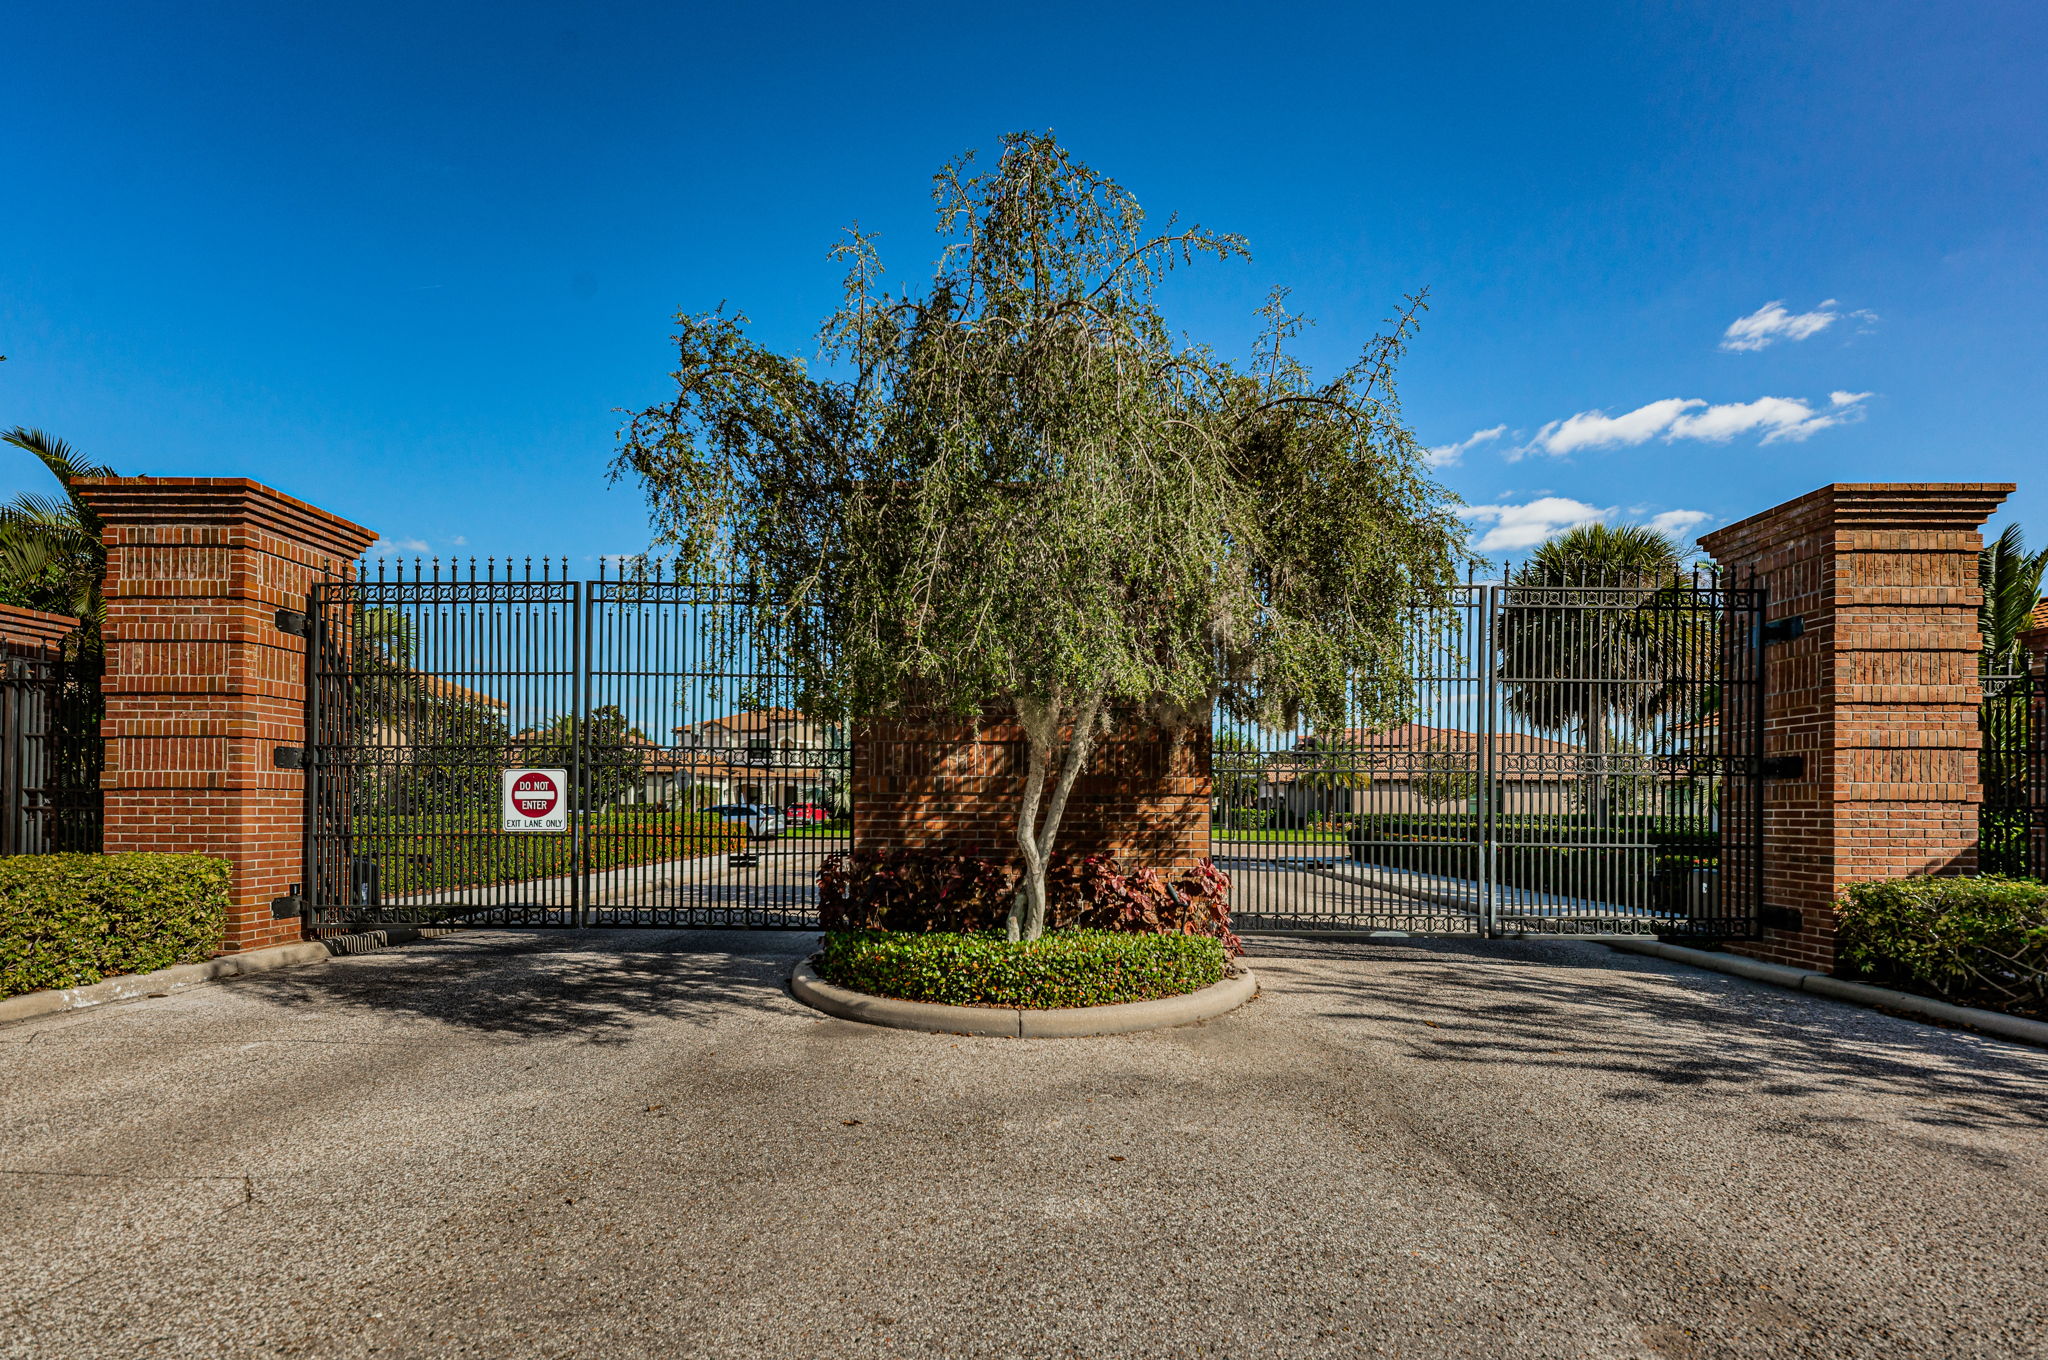 5-Gated Entry